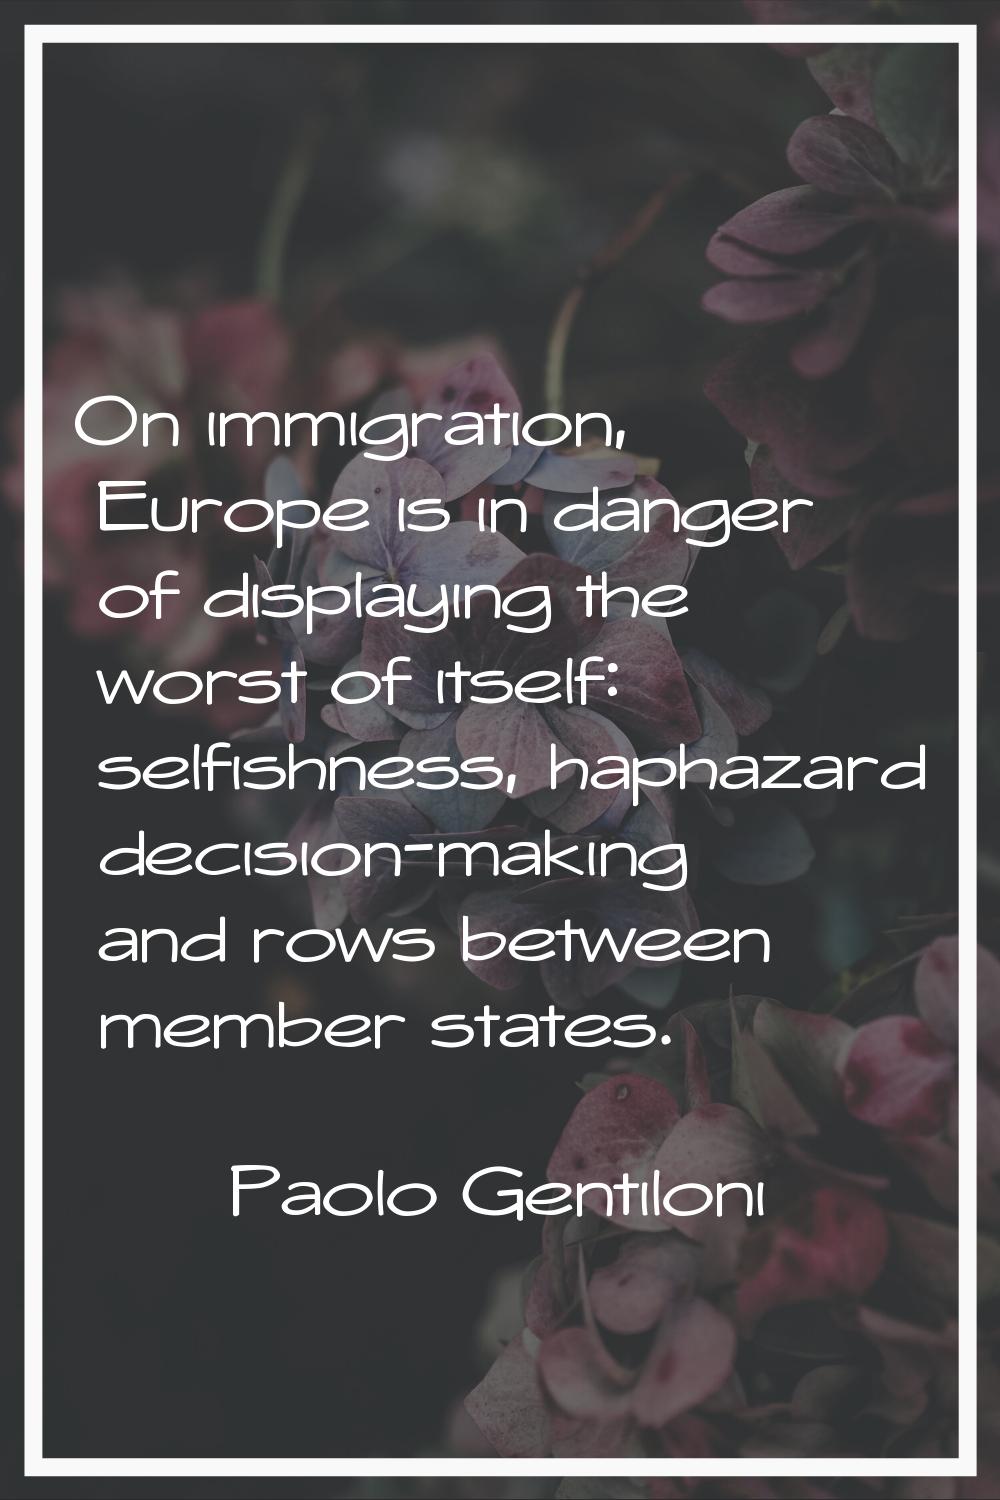 On immigration, Europe is in danger of displaying the worst of itself: selfishness, haphazard decis